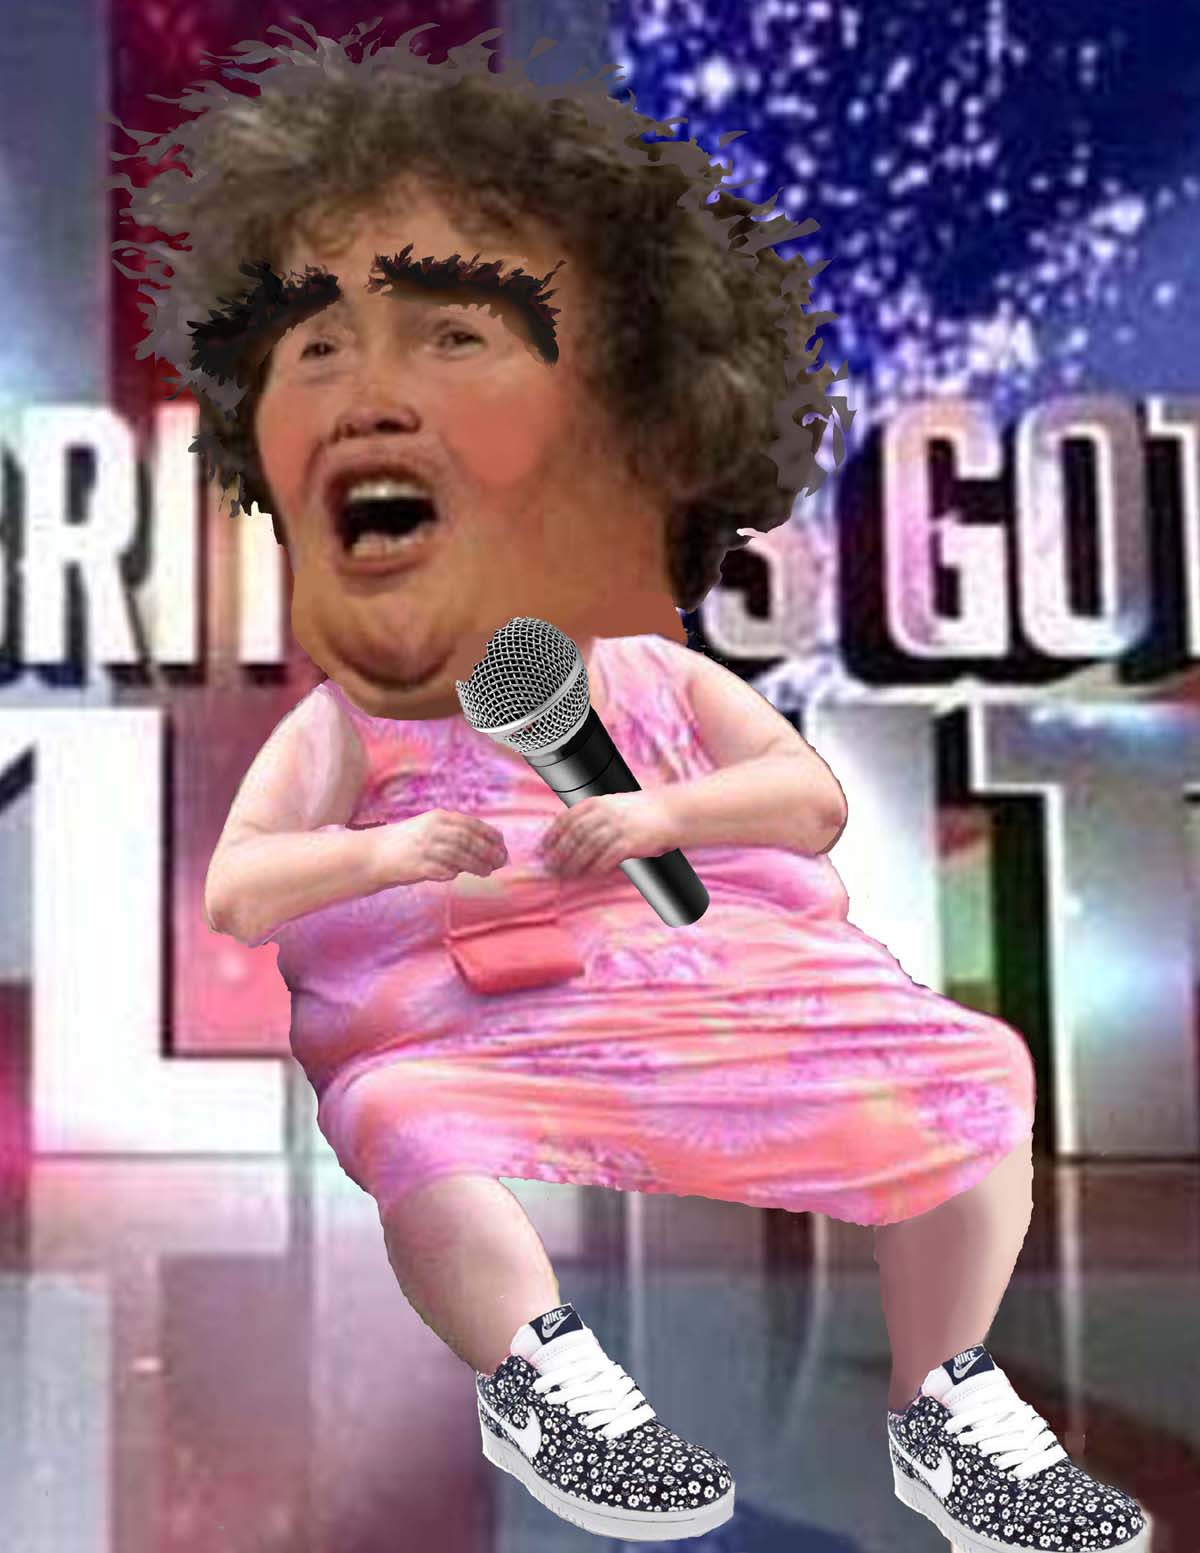 Susan Boyle Photo Caricature created by Caricaturist Steve Nyman http://www.aaacaricatures.com 